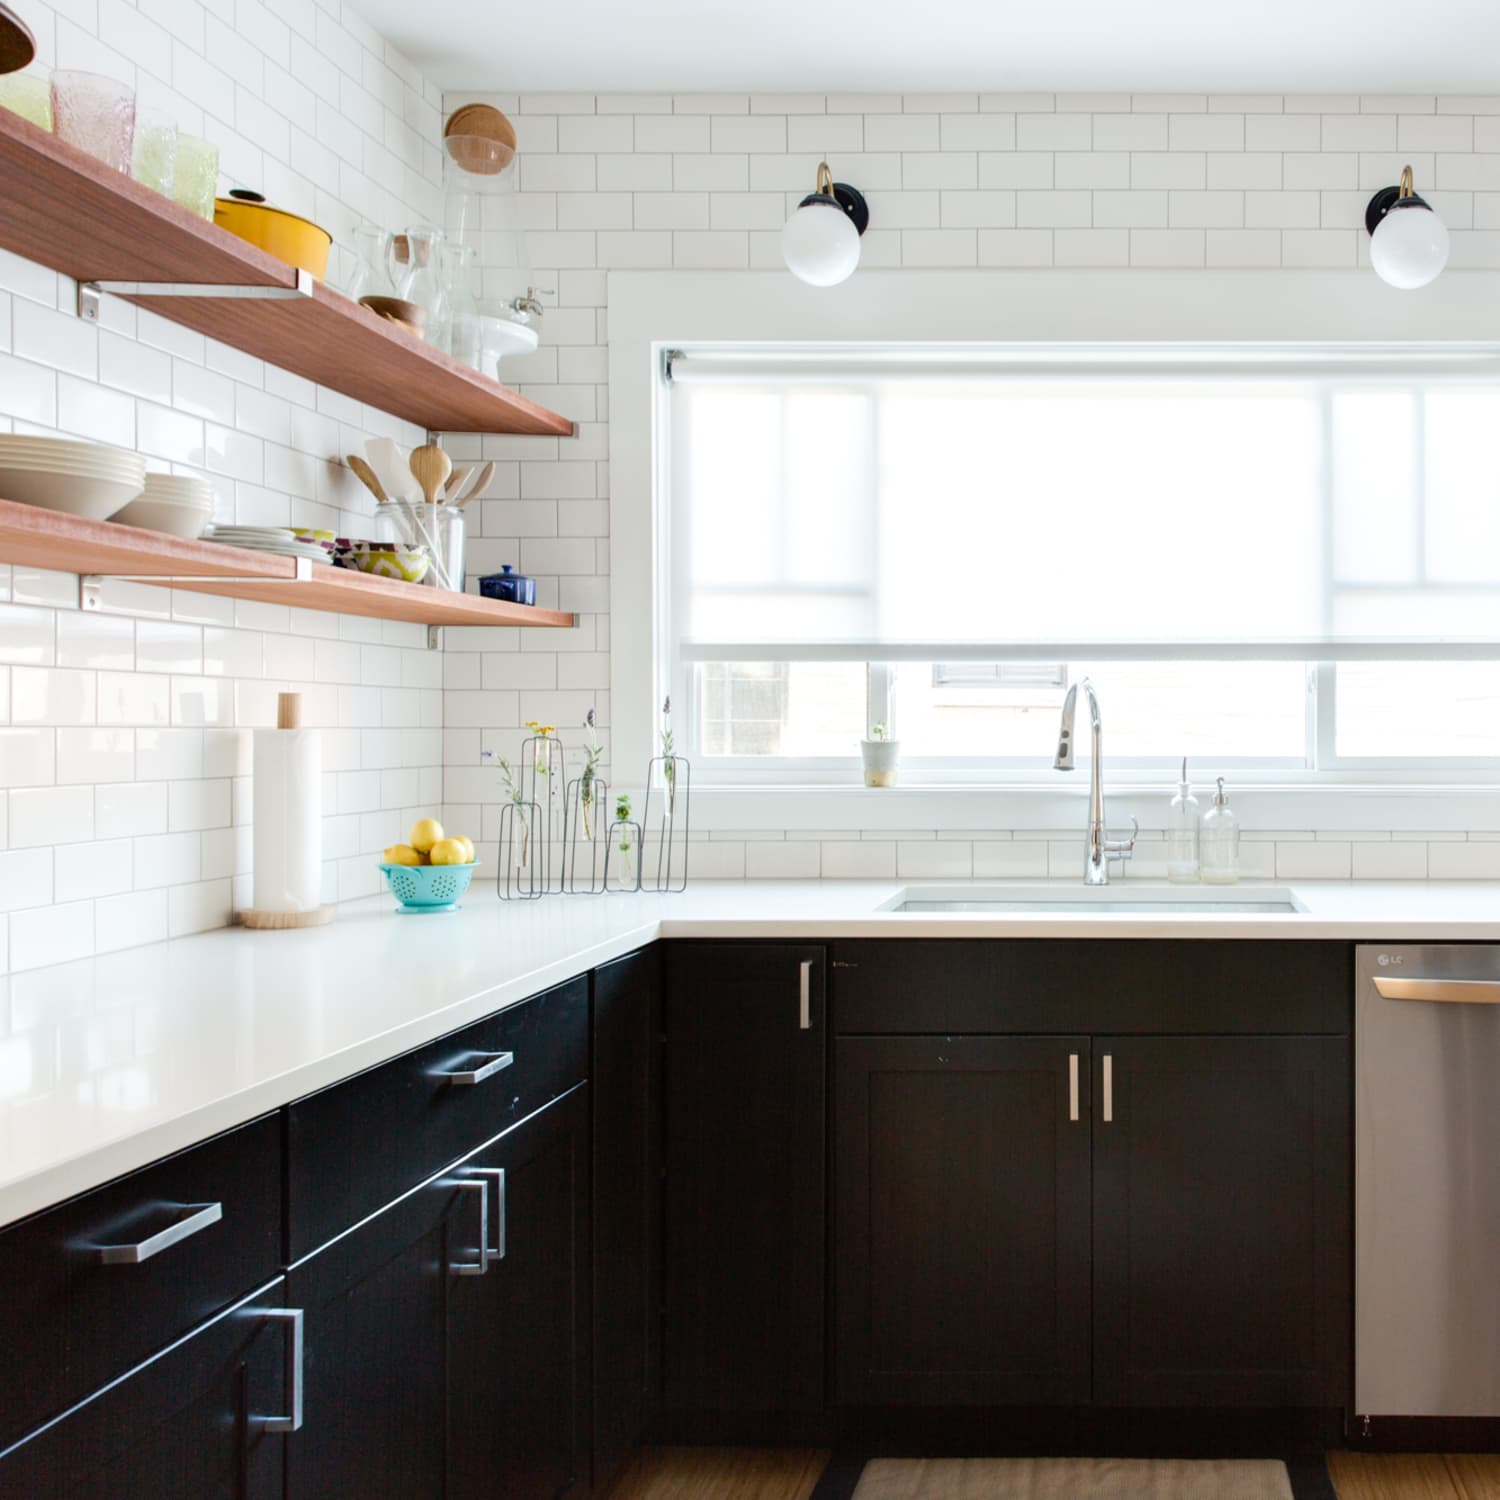 6 Costly Kitchen Remodeling Mistakes to Avoid